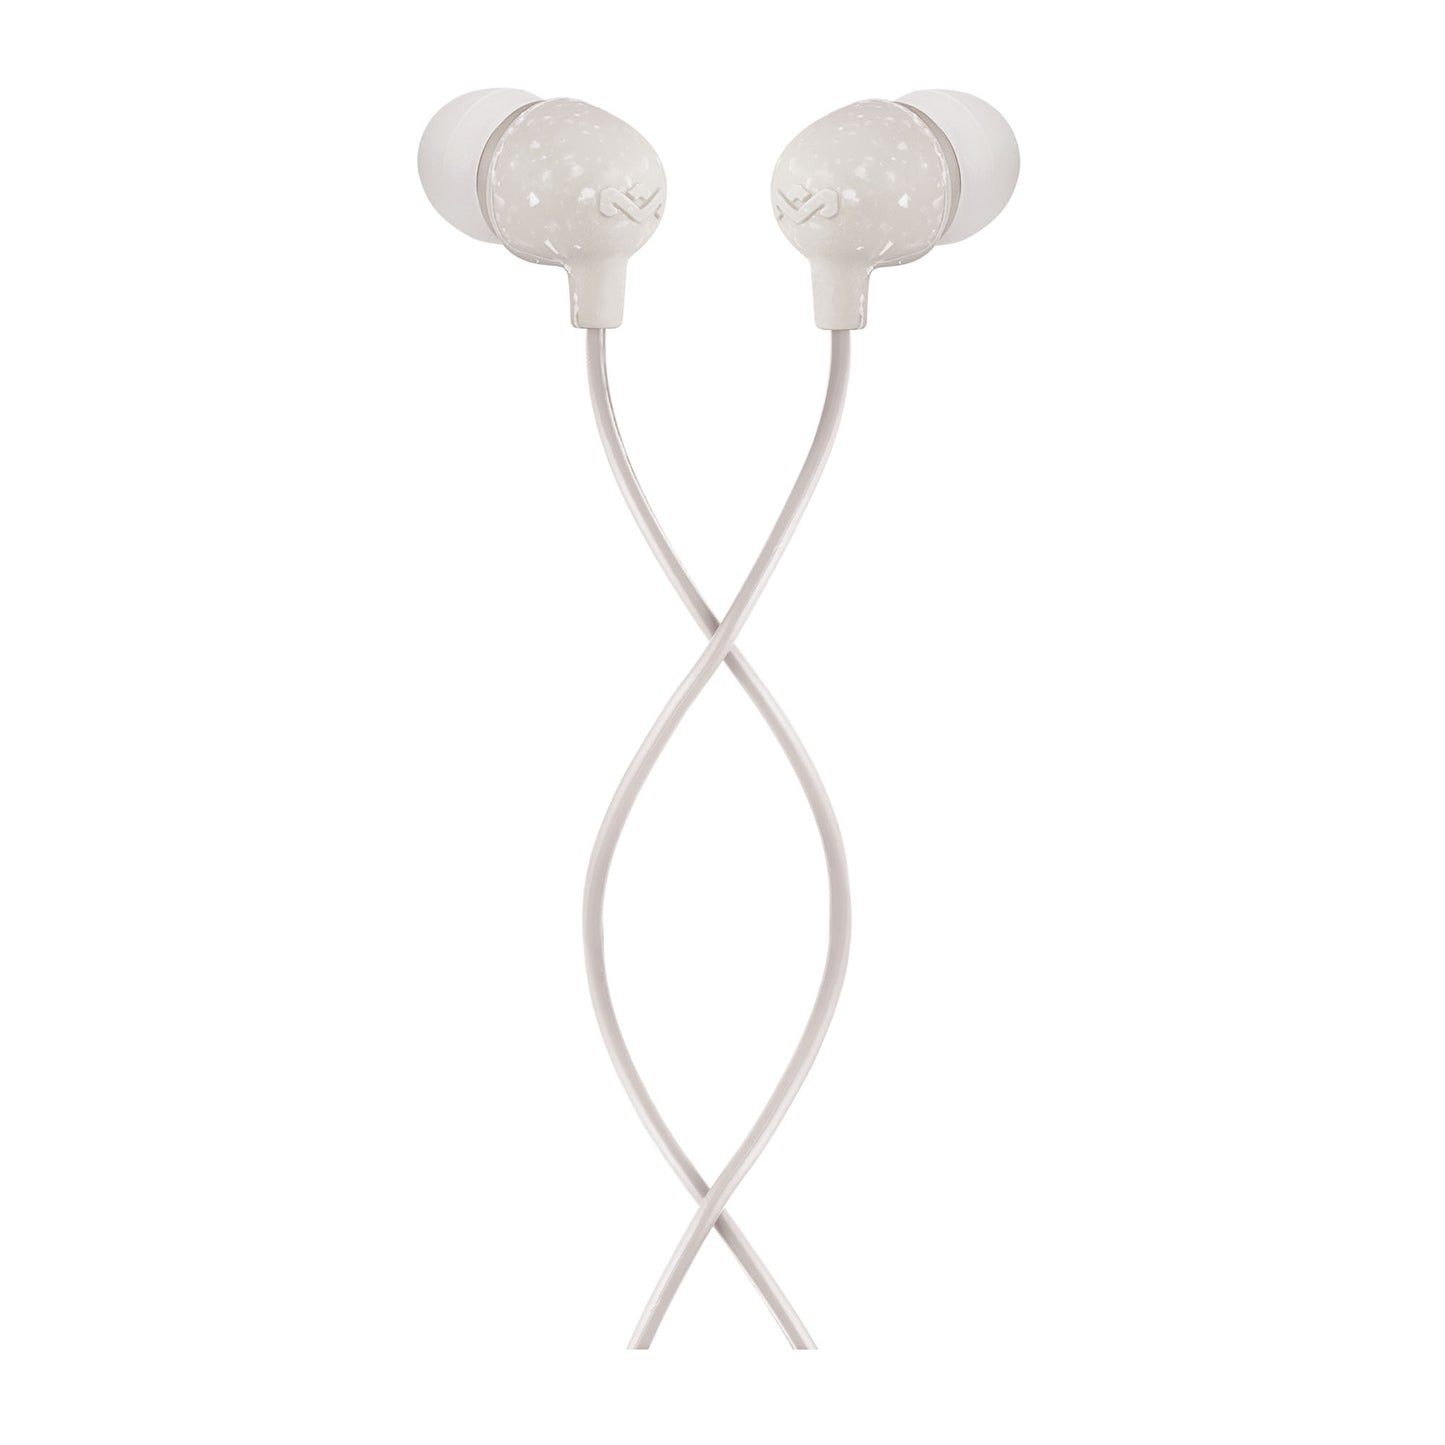 House of Marley White Little Bird Earbuds - 15-00787